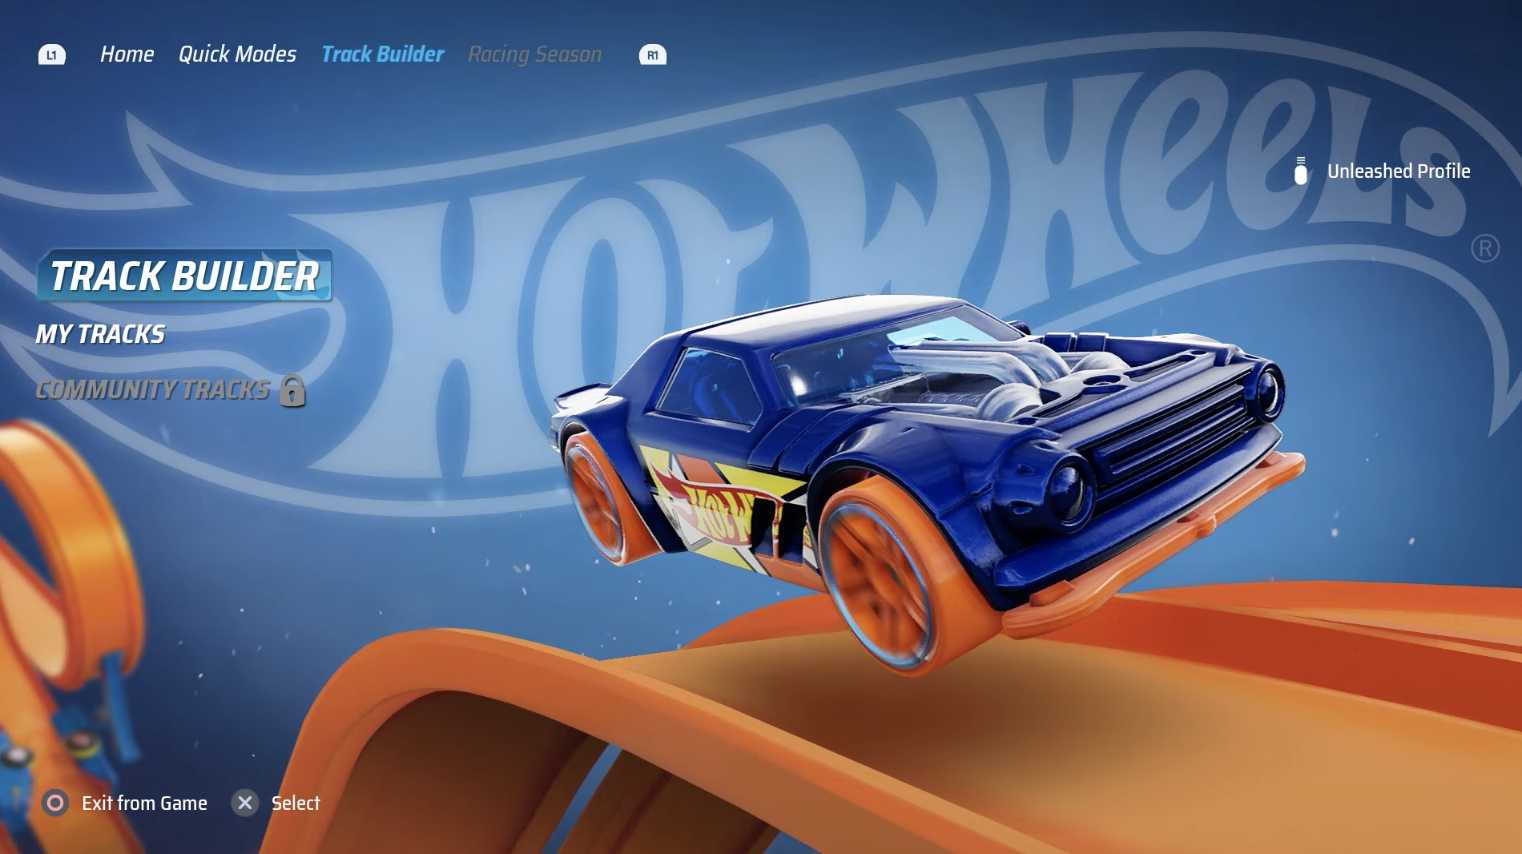 HOT WHEELS UNLEASHED™ 2 - Turbocharged  Download and Buy Today - Epic  Games Store